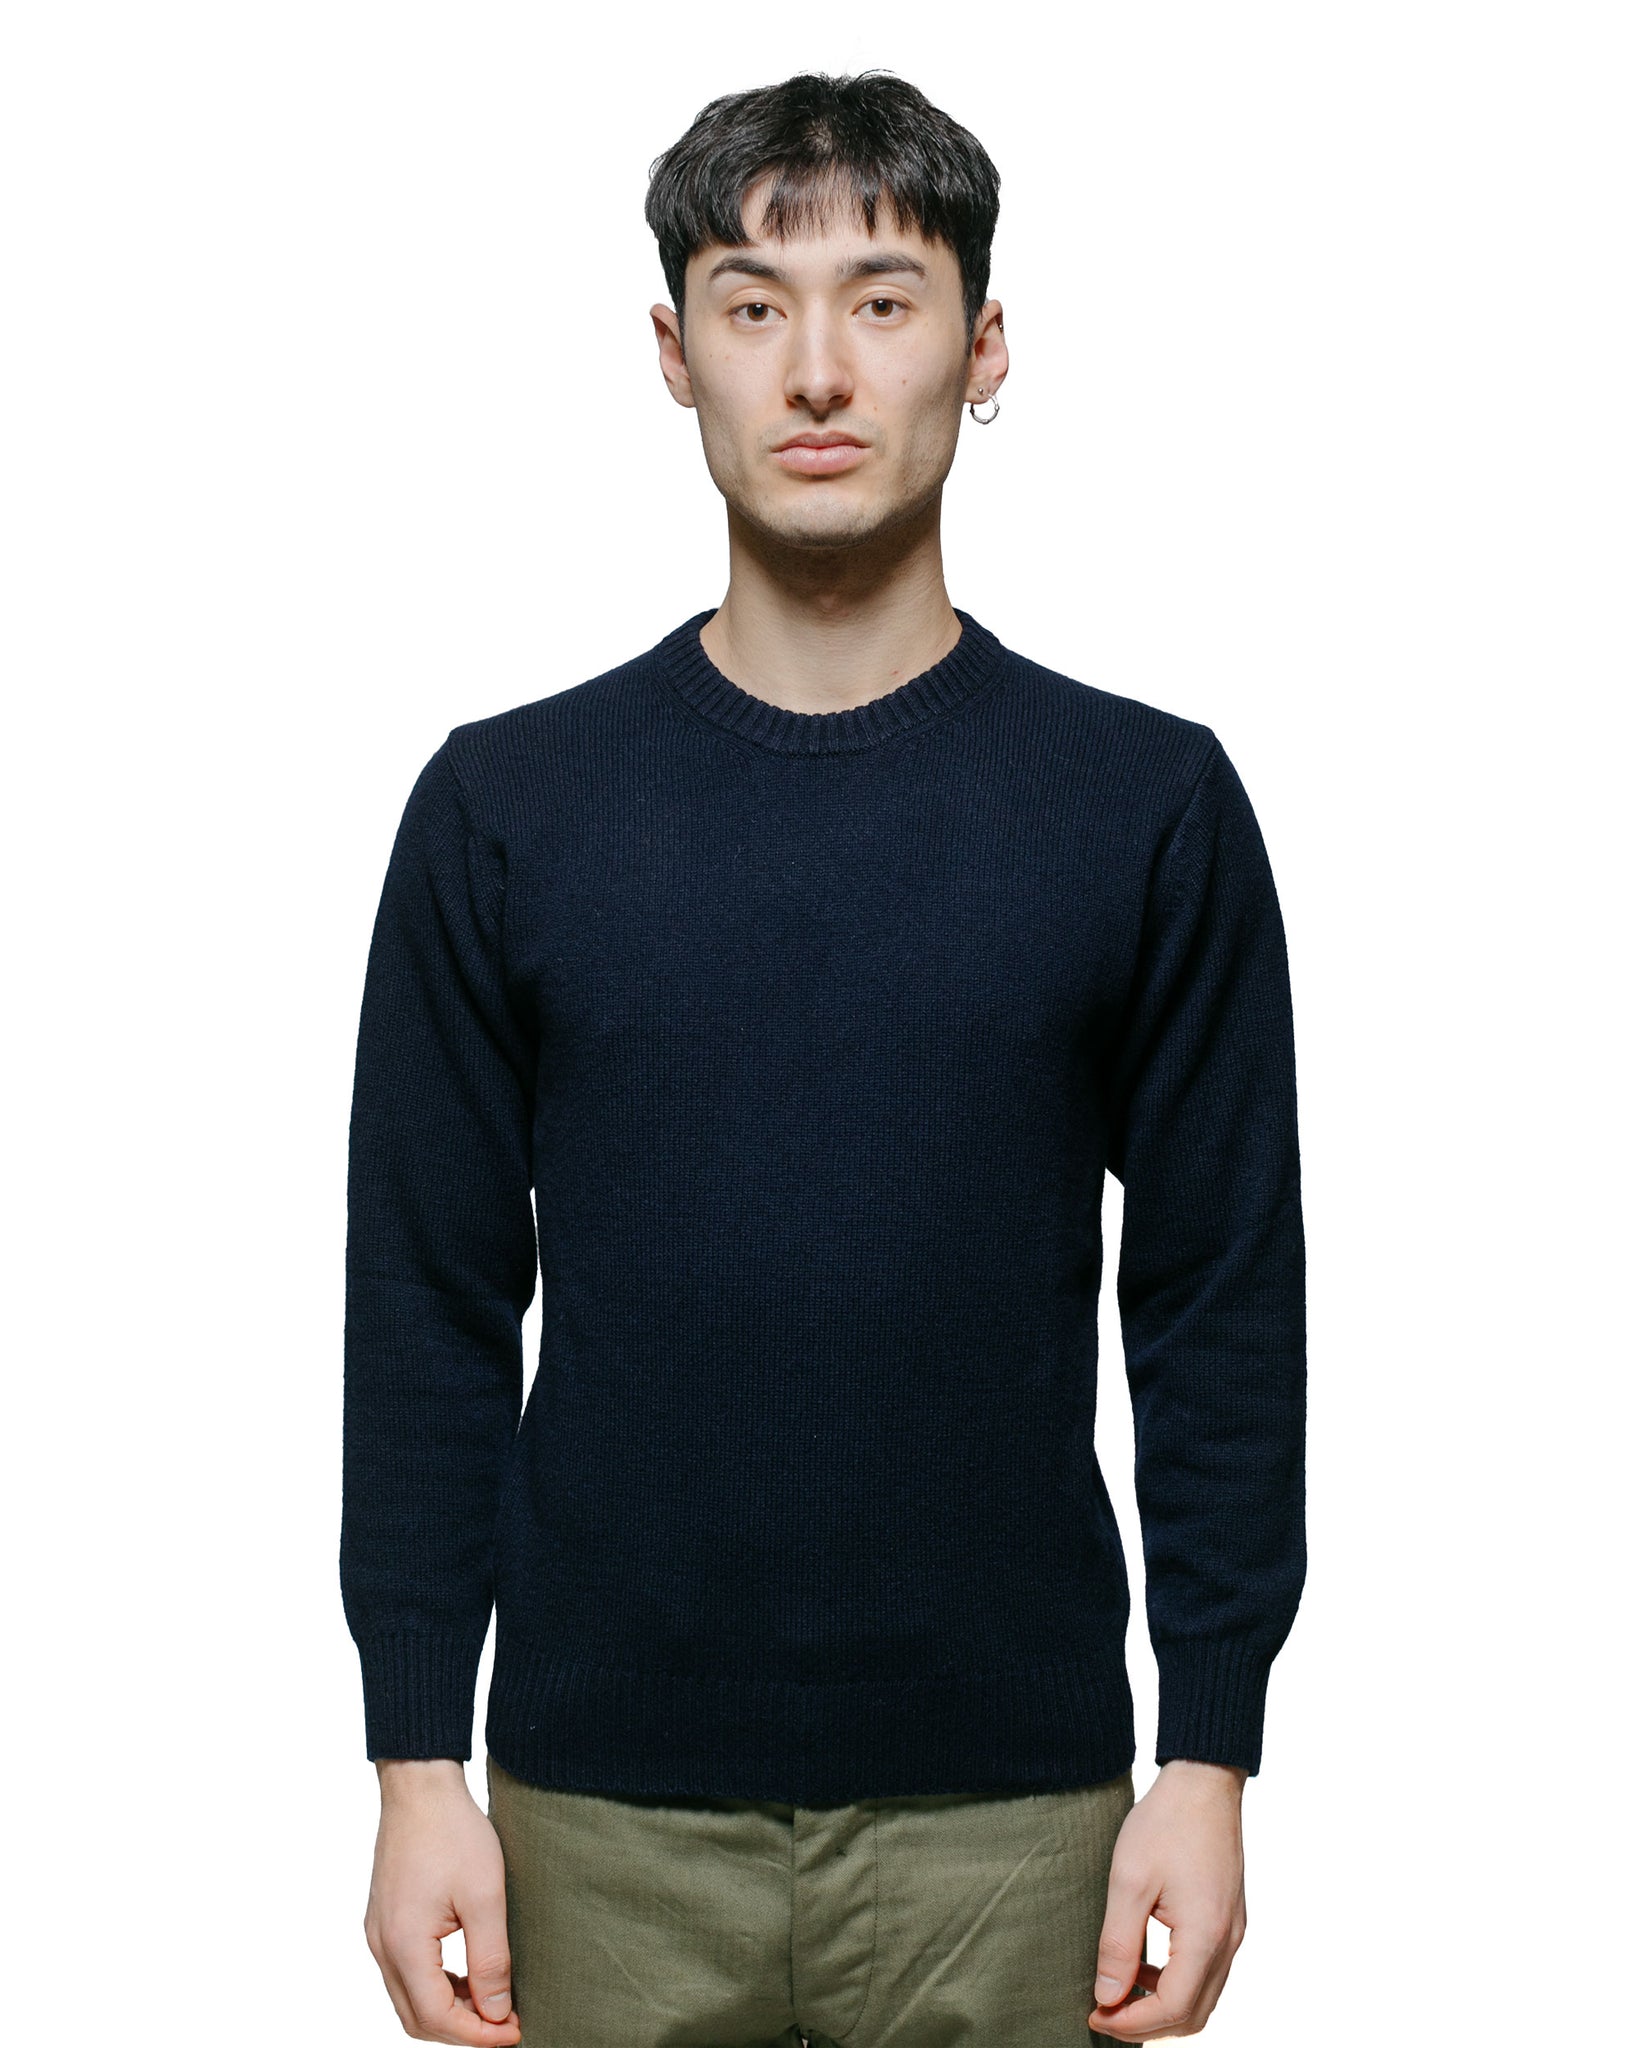 The Real McCoy's MC21114 Wool Crewneck Sweater Navy model front